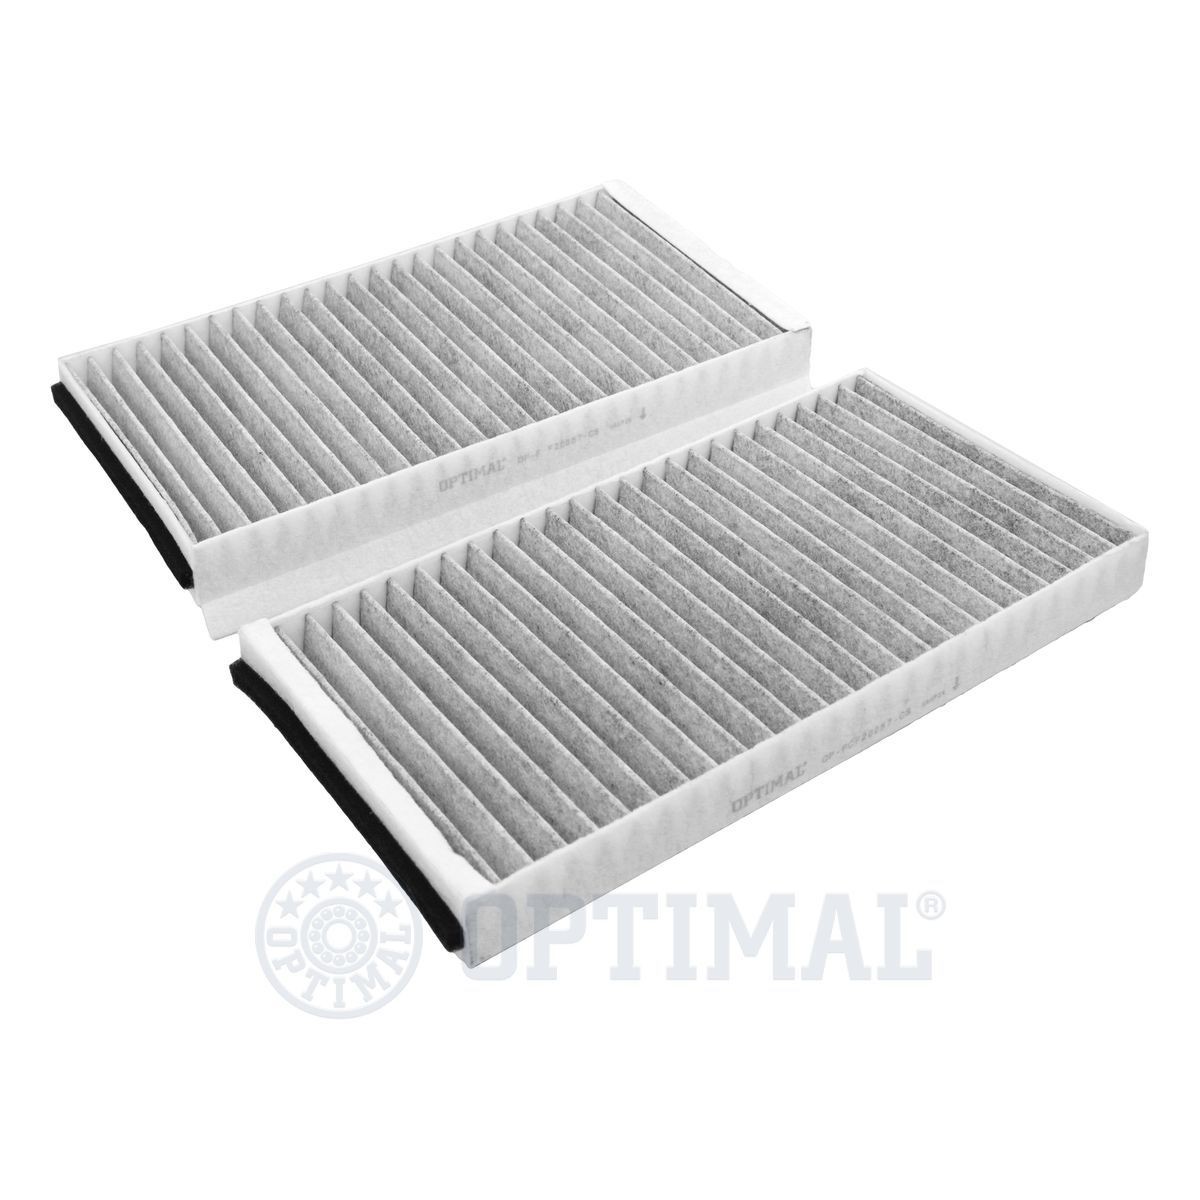 OPTIMAL Activated Carbon Filter, 324, 318 mm x 202 mm x 31 mm Width: 202mm, Height: 31mm, Length: 324, 318mm Cabin filter OP-FCF20057-CS buy